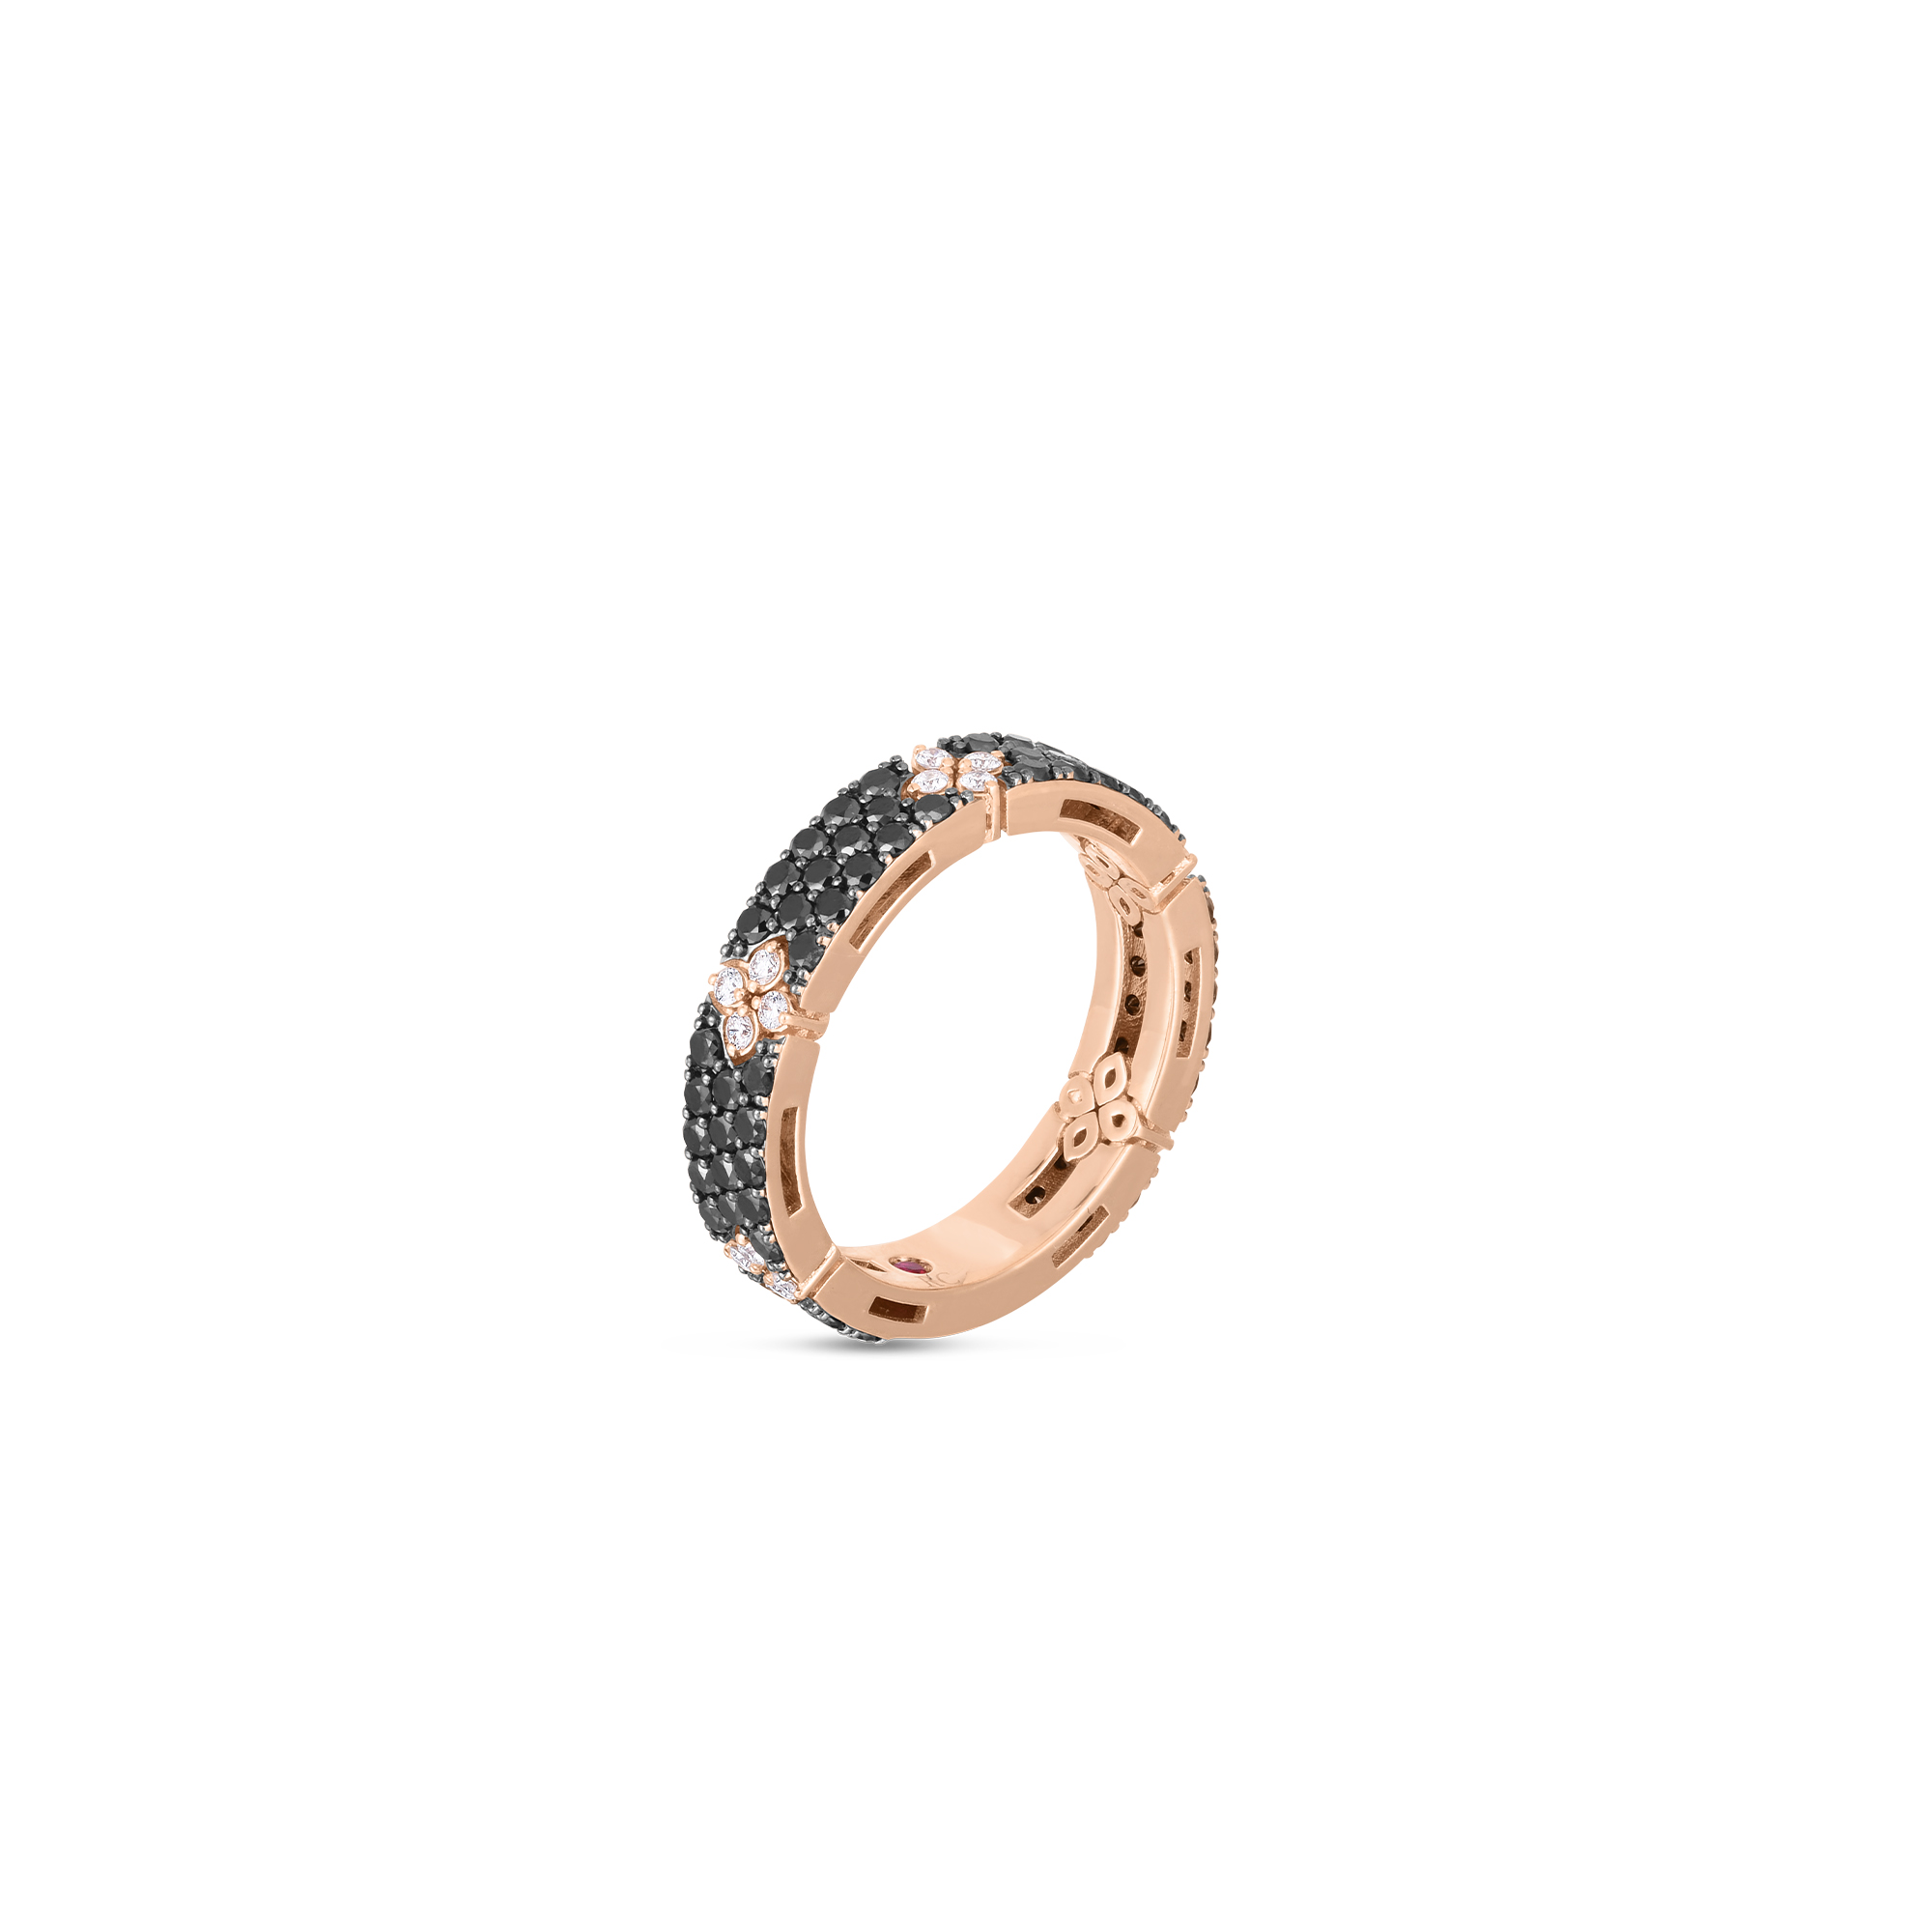 Shop the Roberto Coin Ring 8883105AB65X | Kirk Jewelers